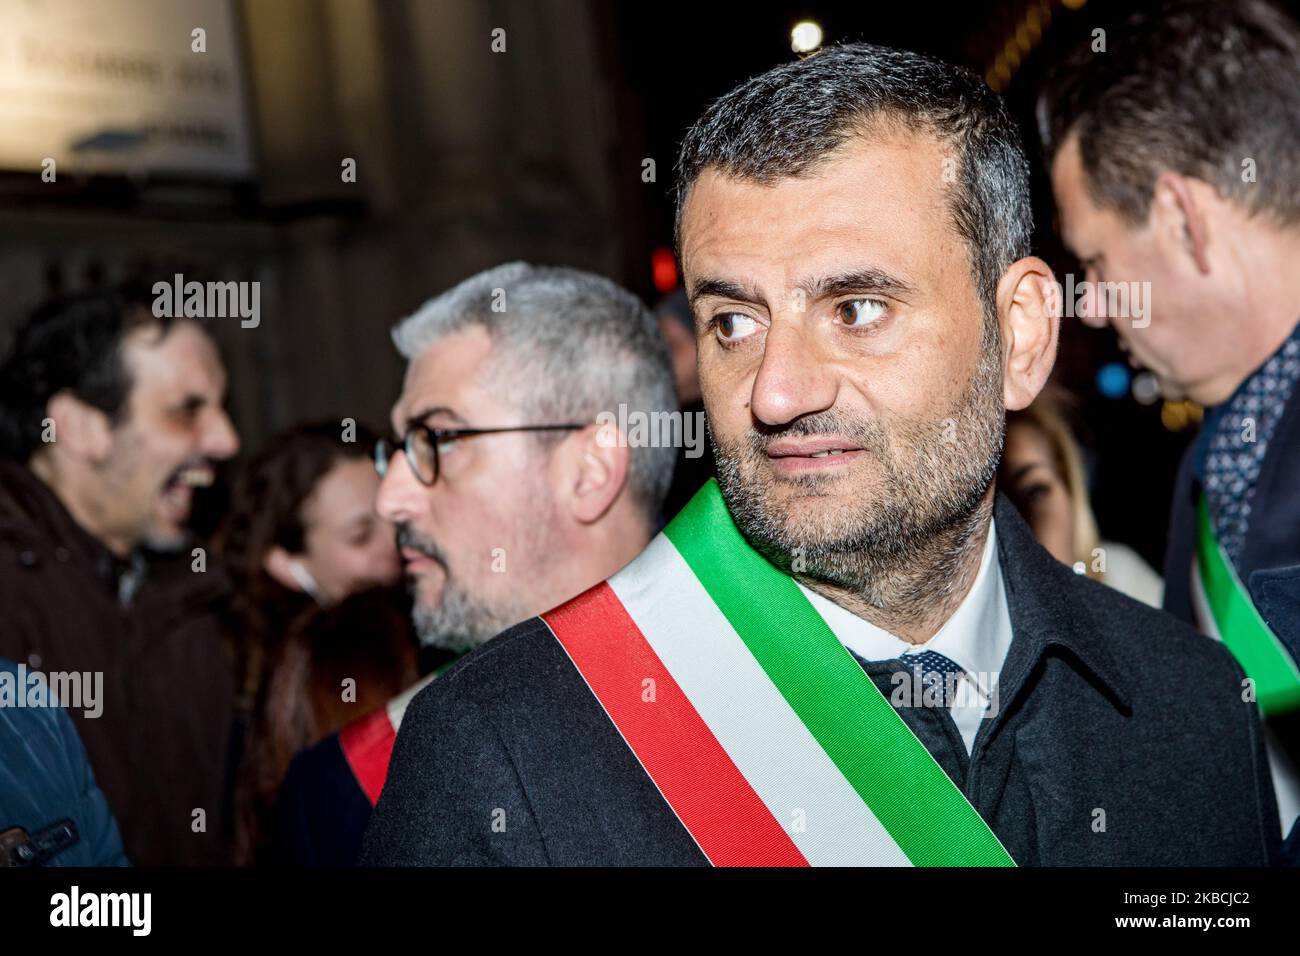 Antonio Decaro, Mayor of Bari, attends during the march 'L'odio NON HA Futuro' on December 10 2019 in Milan, Italy. More than 600 mayors and councillors joined the procession that crossed the entire Piazza del Duomo in Milan and ended in Piazza della Scala where Liliana Segre spoke for a public intervention against the hatred that is increasing in Italy and Europe. (Photo by Mairo Cinquetti/NurPhoto) Stock Photo